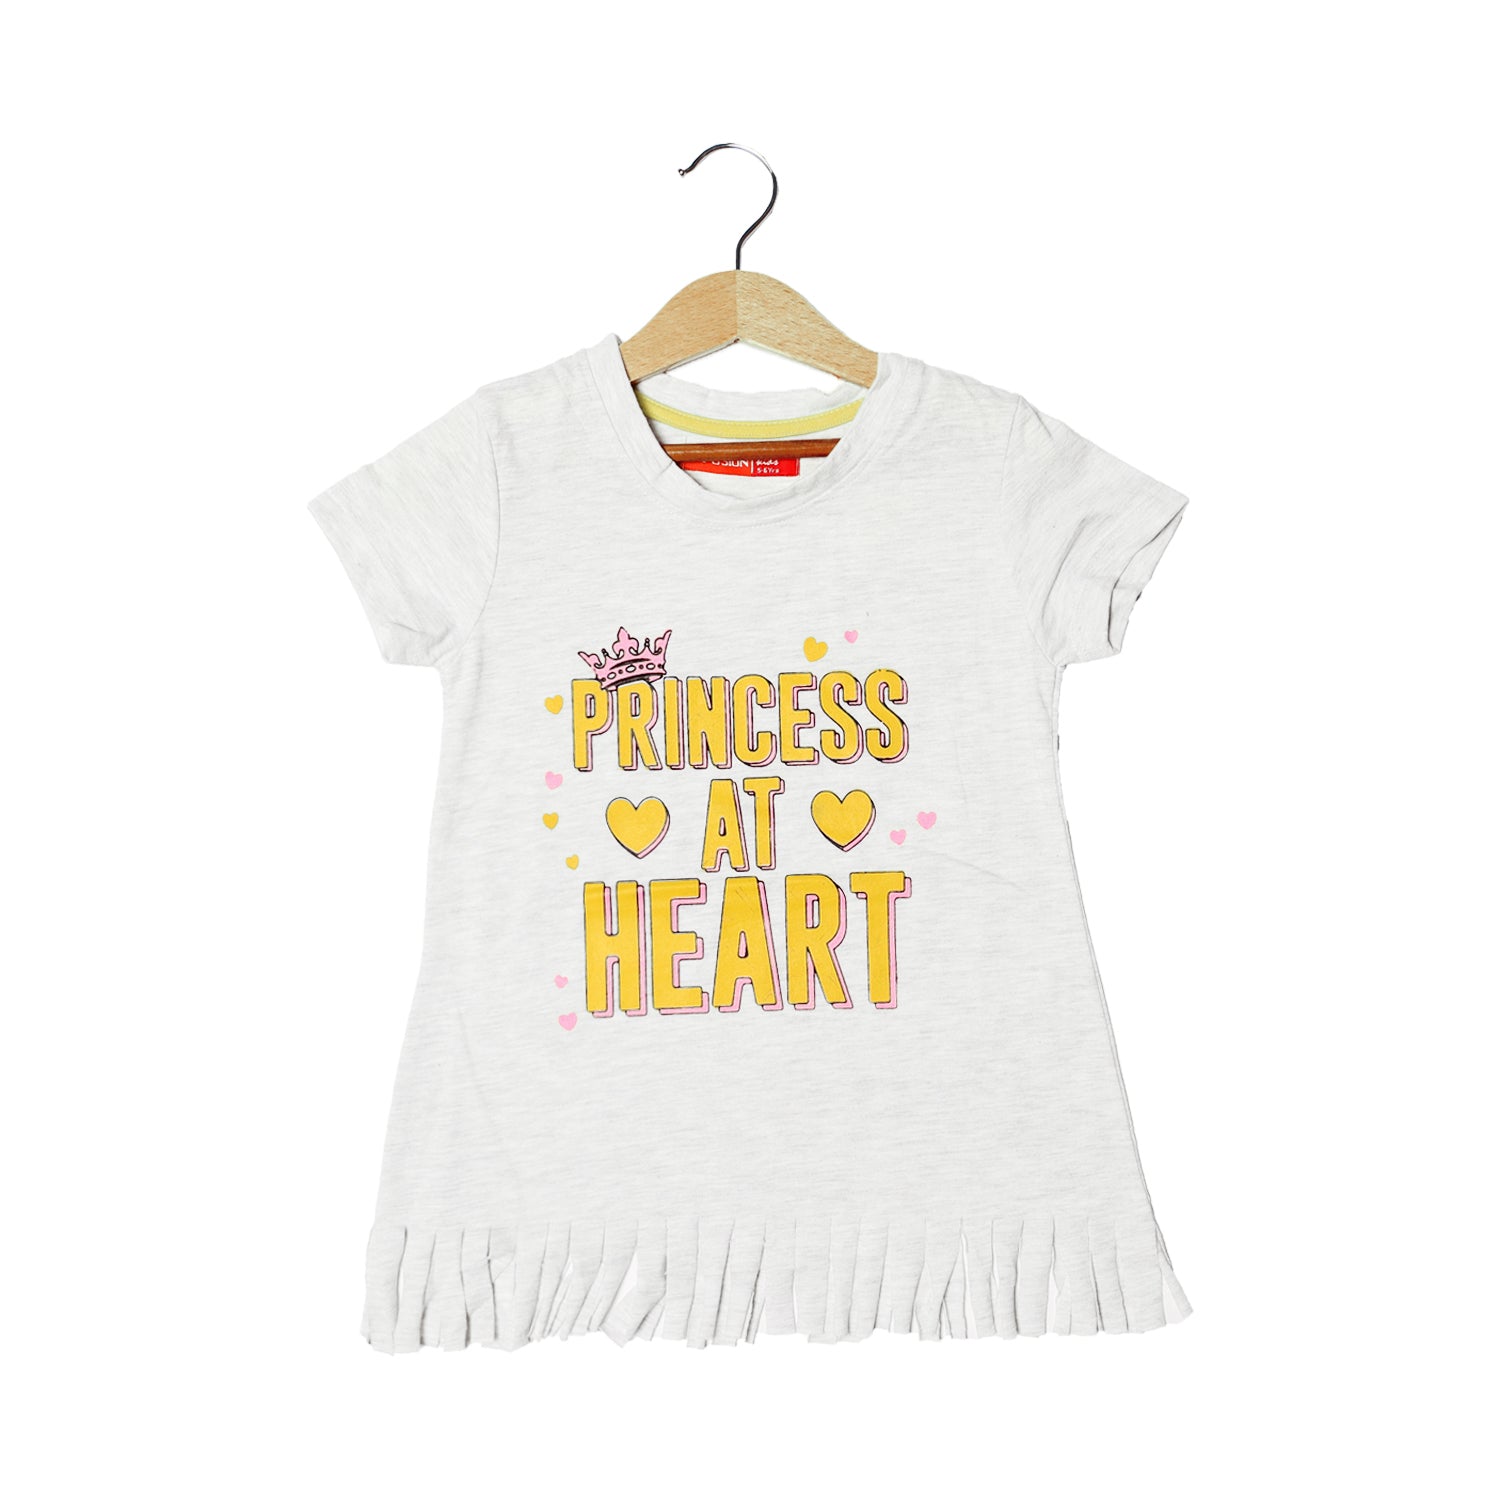 OFF WHITE PRINCESS AT HEART PRINTED T-SHIRT FOR GIRLS